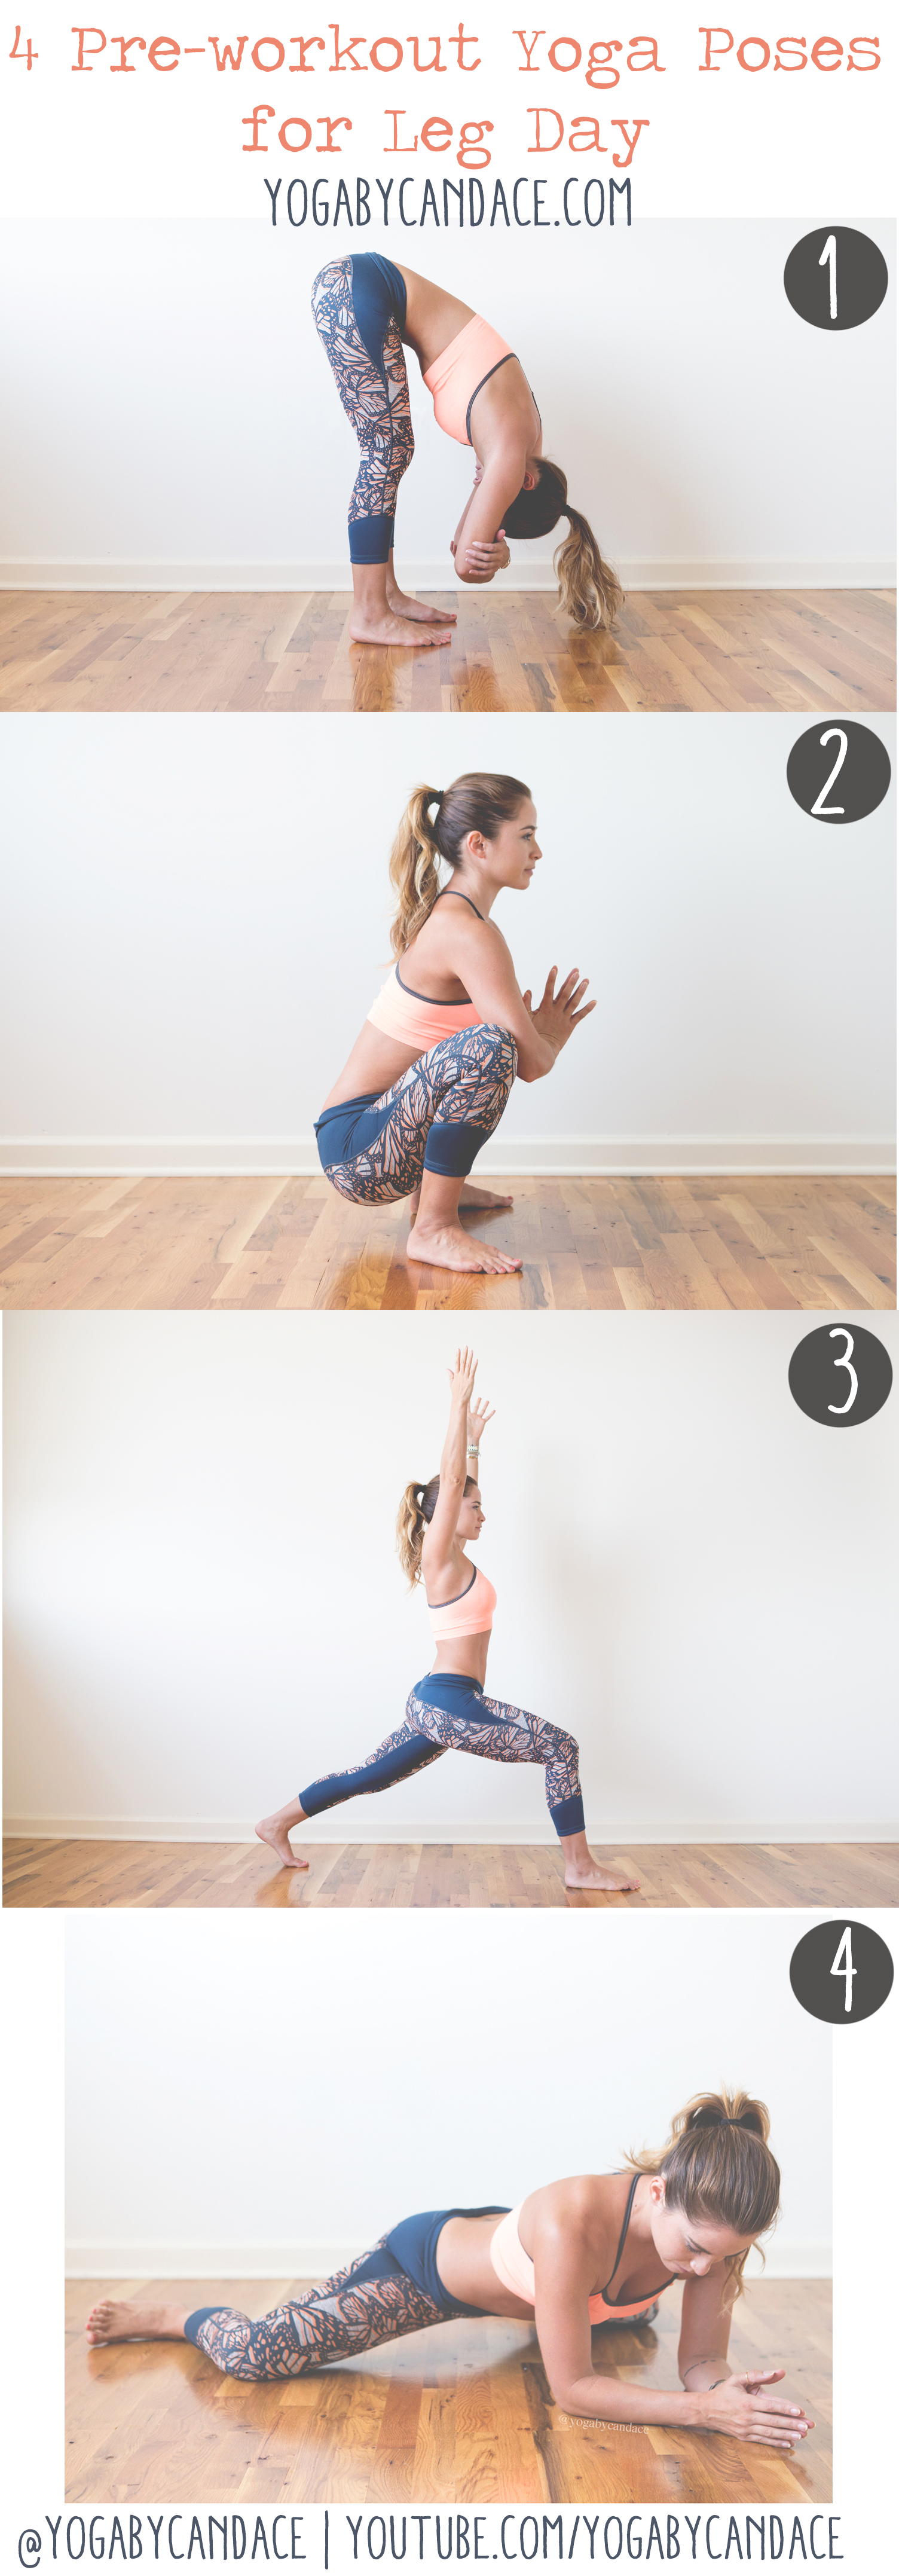 Yoga Poses for Hips - Yoga for Tight Hips | Yoga for Runners | Sublimely  Fit | Cool yoga poses, Yoga life, Yoga asanas